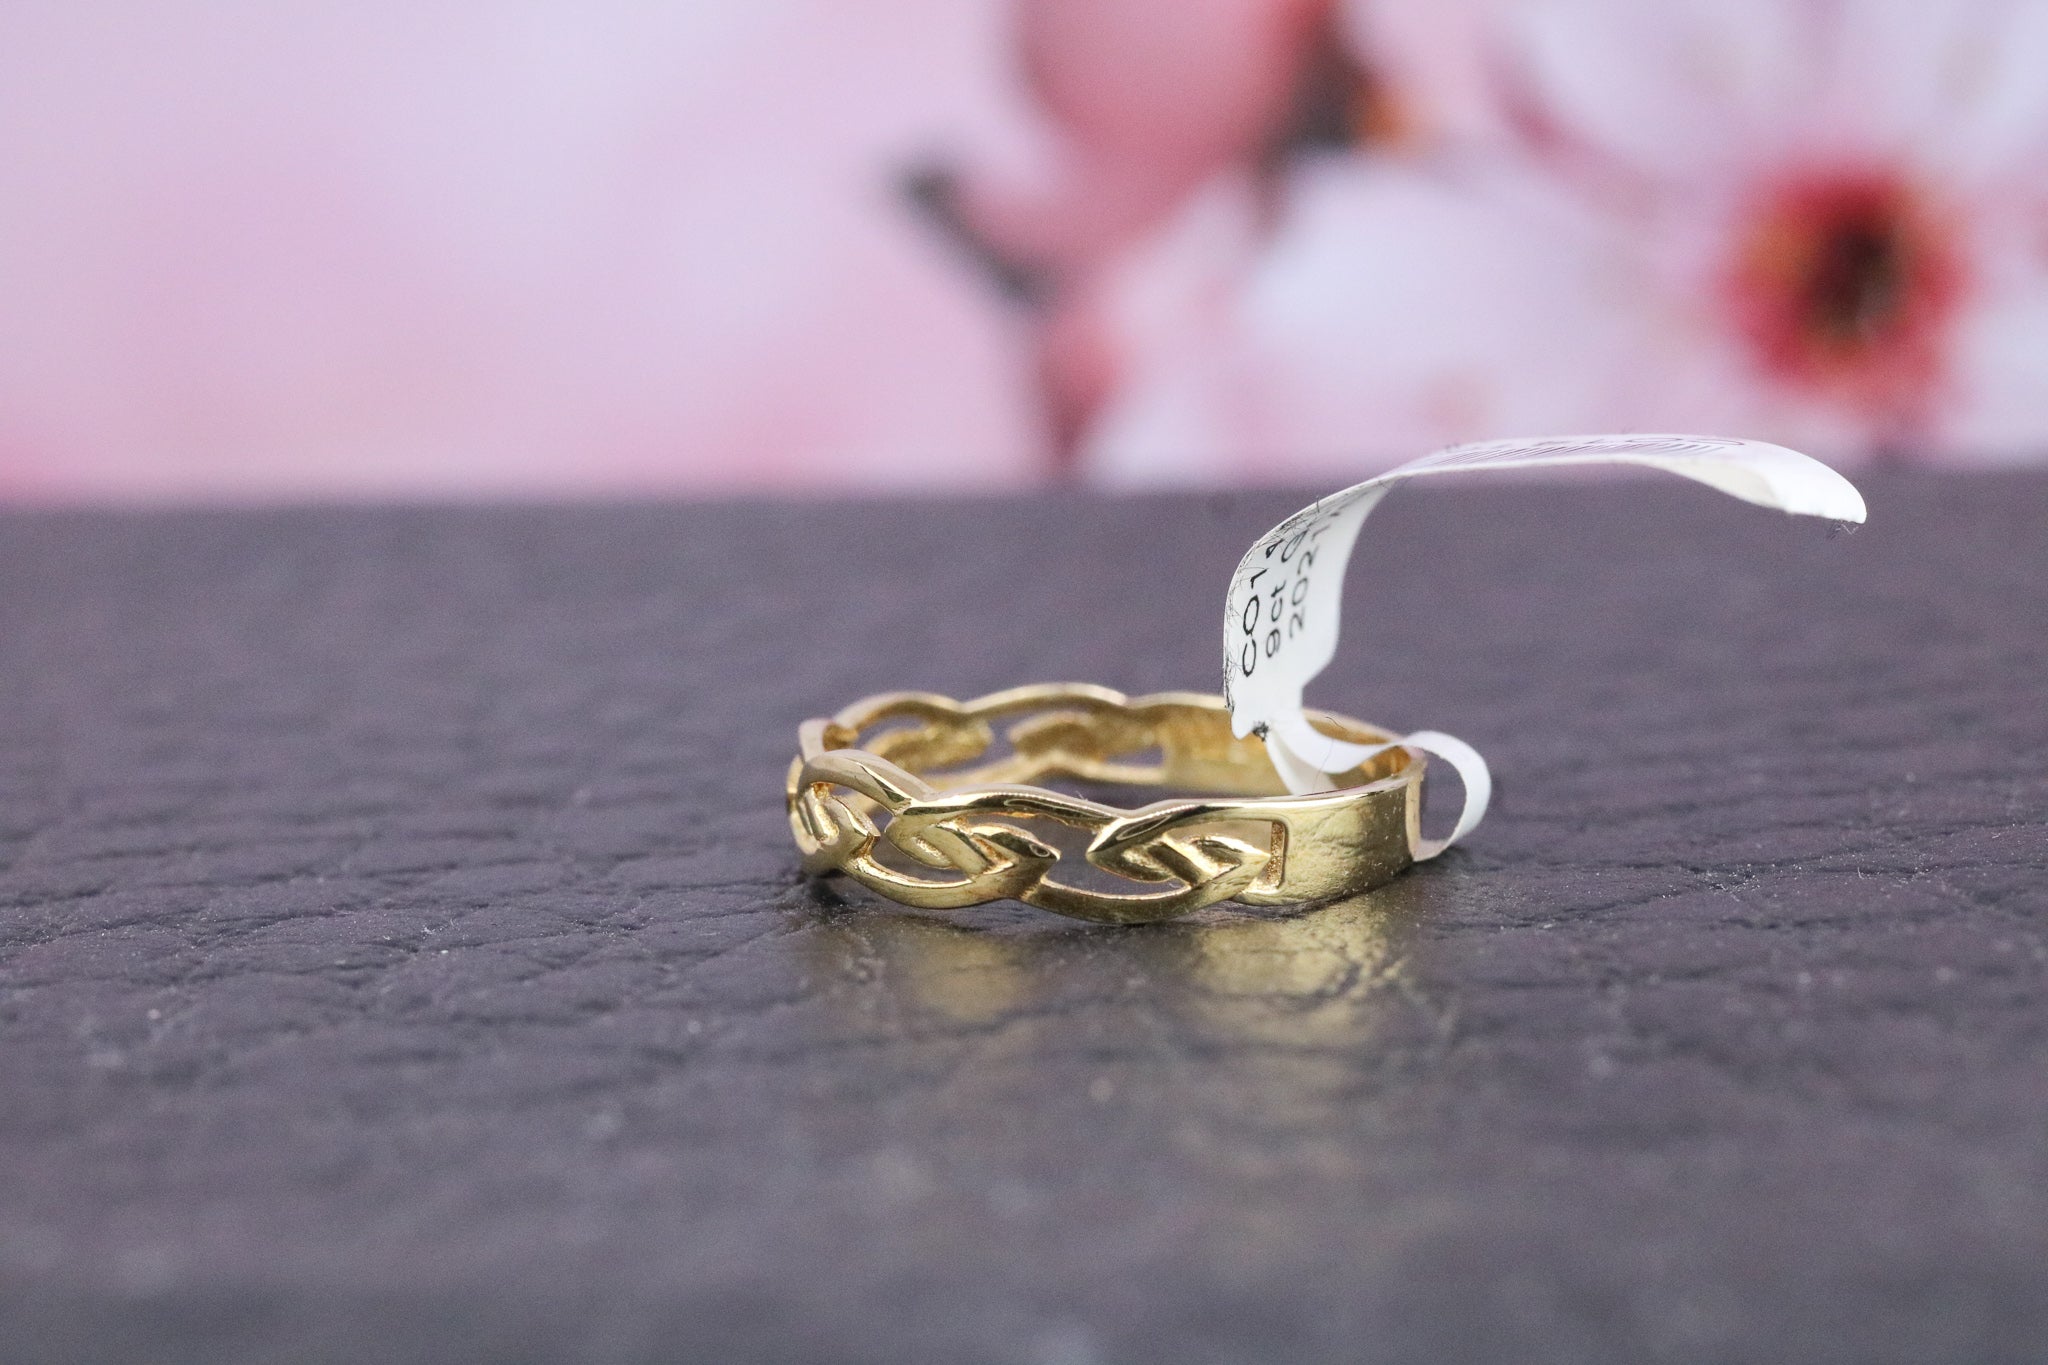 9ct Gold Celtic Ring - CO1416 - Hallmark Jewellers Formby & The Jewellers Bench Widnes